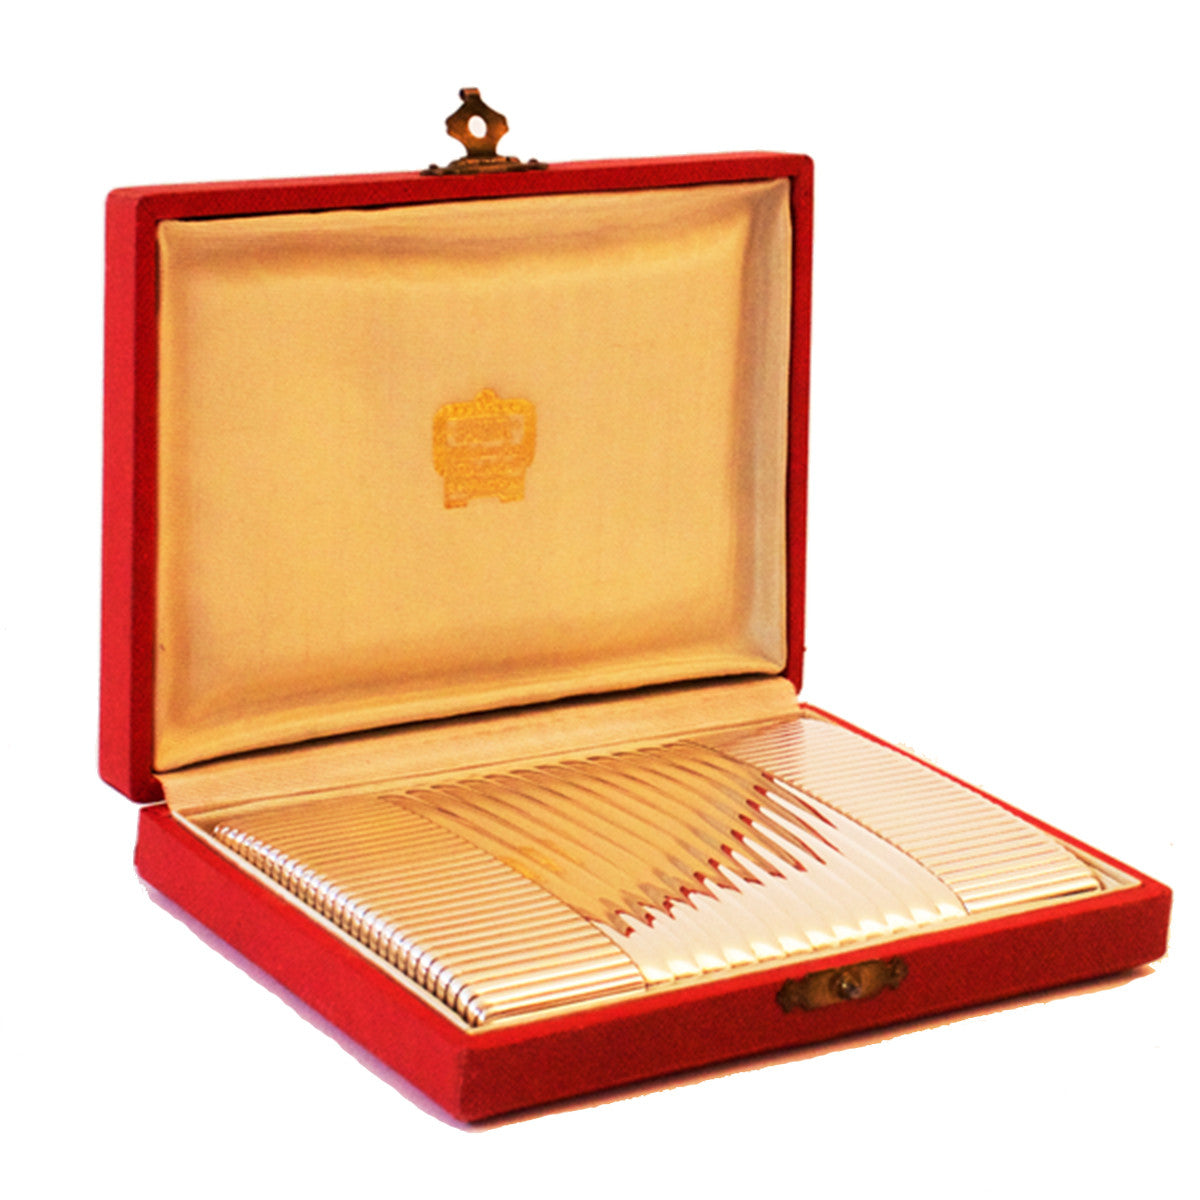 Classic Cartier card holder, sold in a distinctive red velvet box